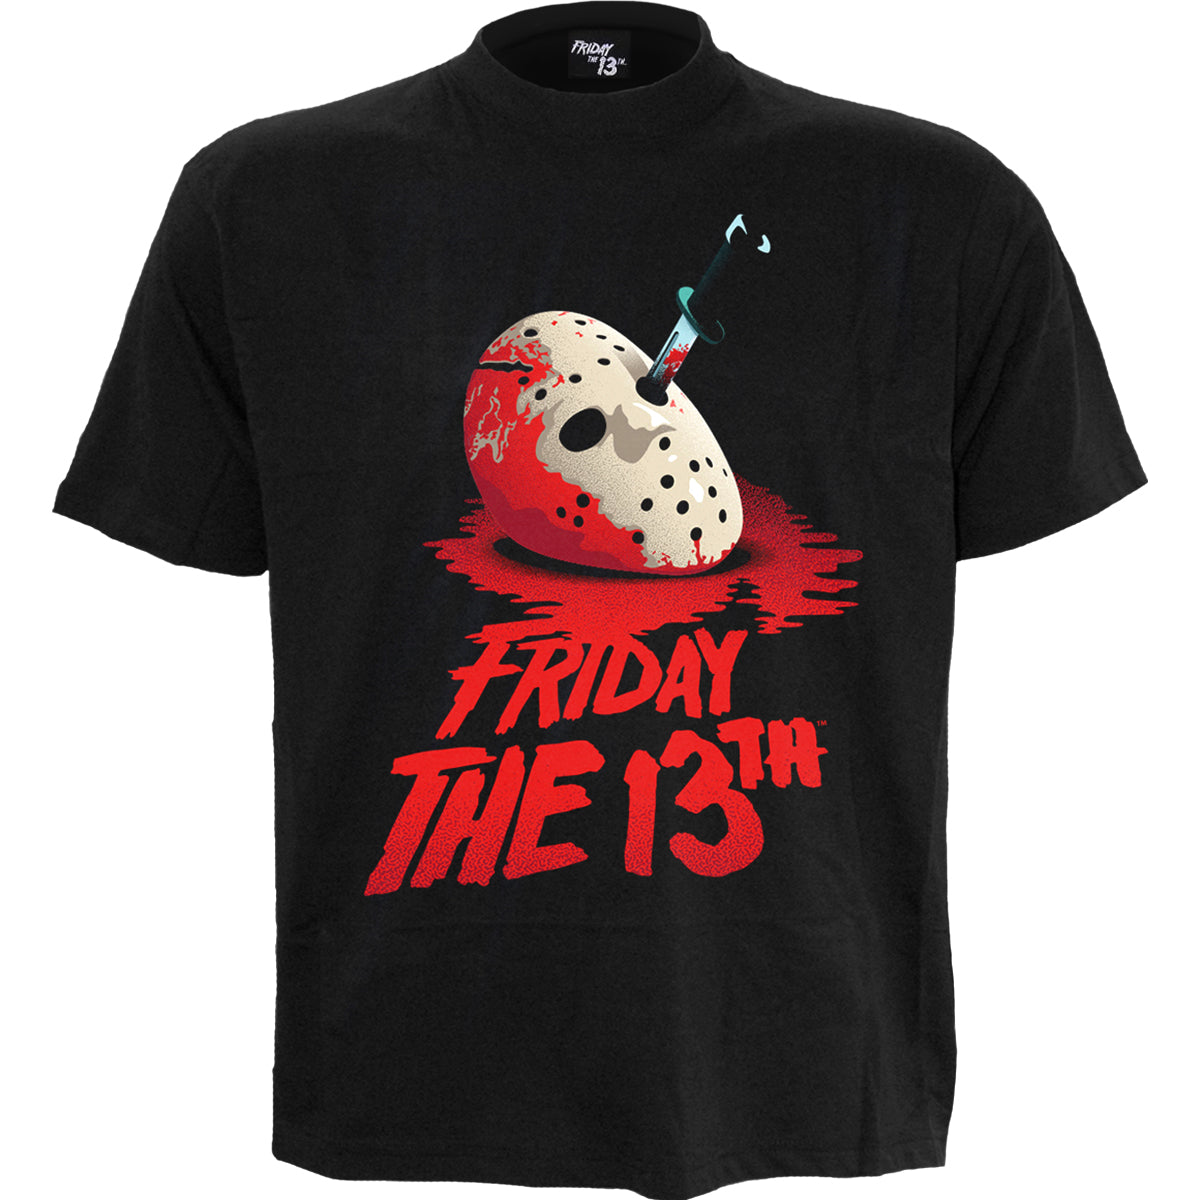 FRIDAY THE 13TH - CLASSIC MASK - Front Print T-Shirt Black